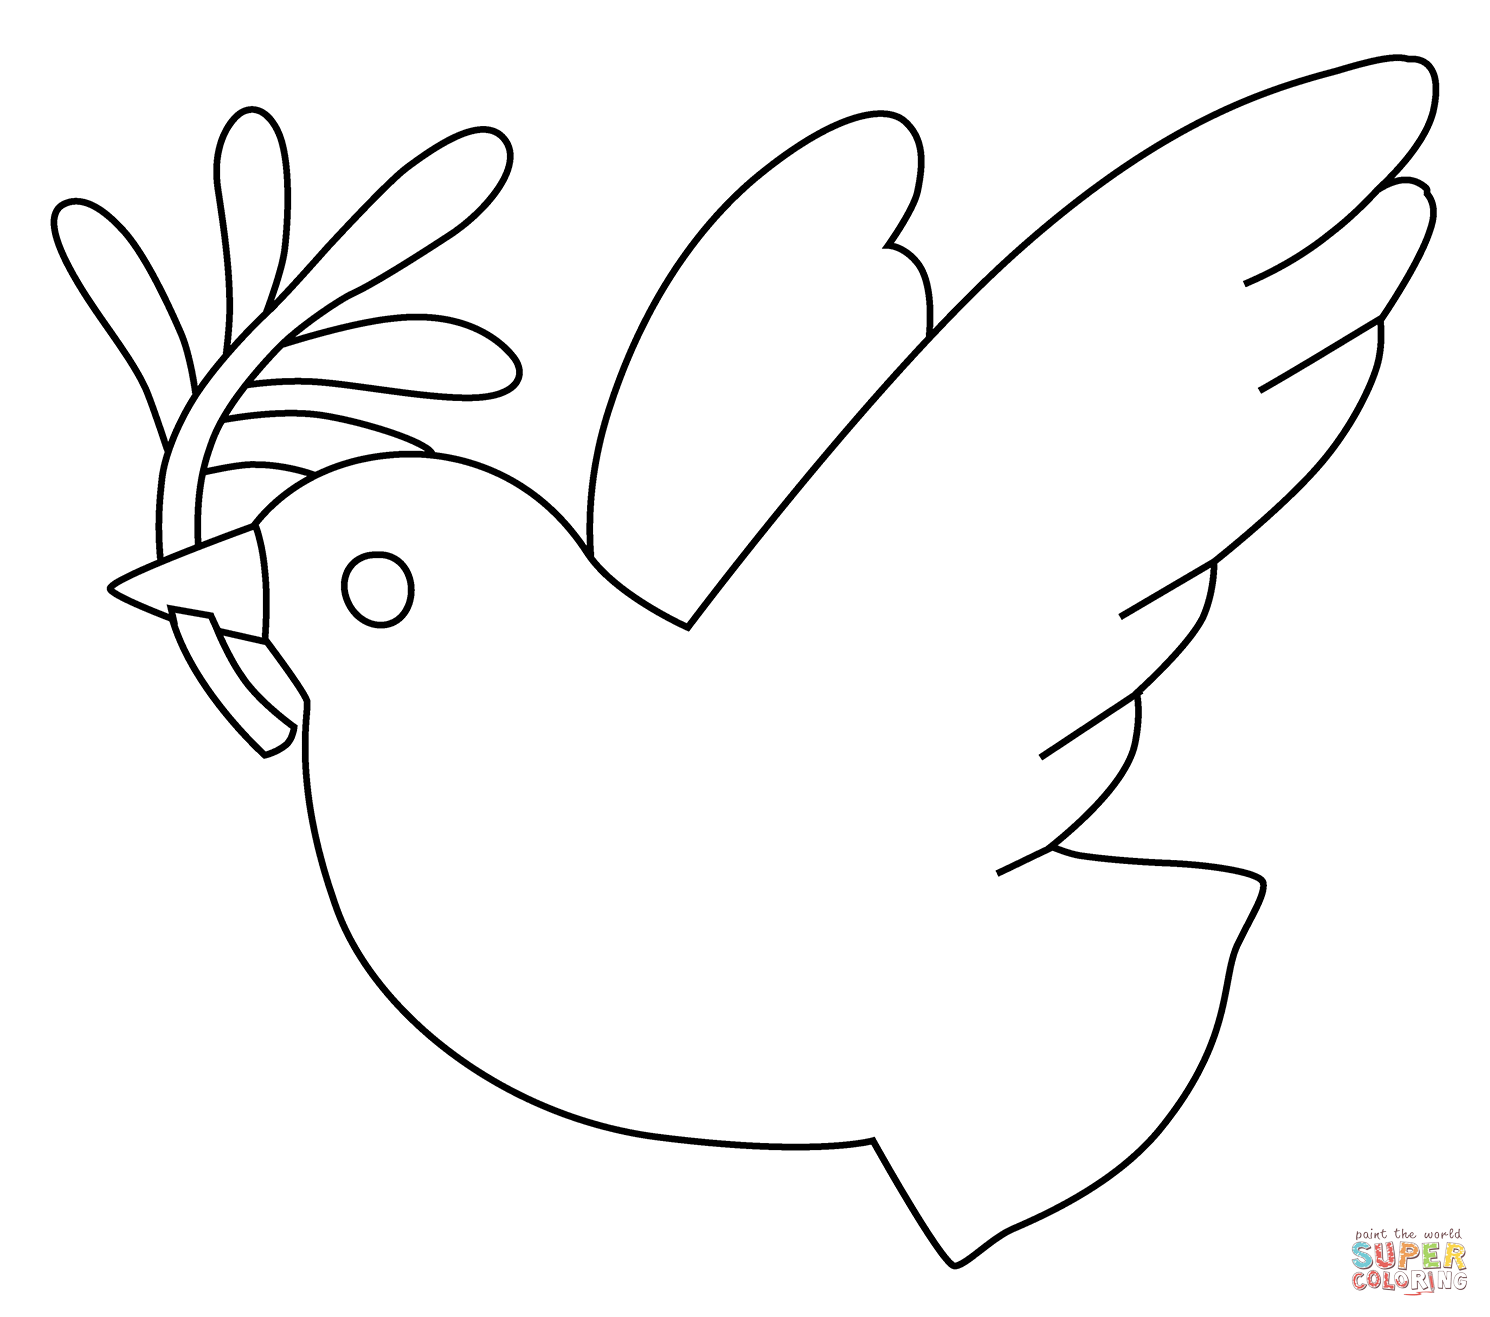 Dove emoji coloring page free printable coloring pages